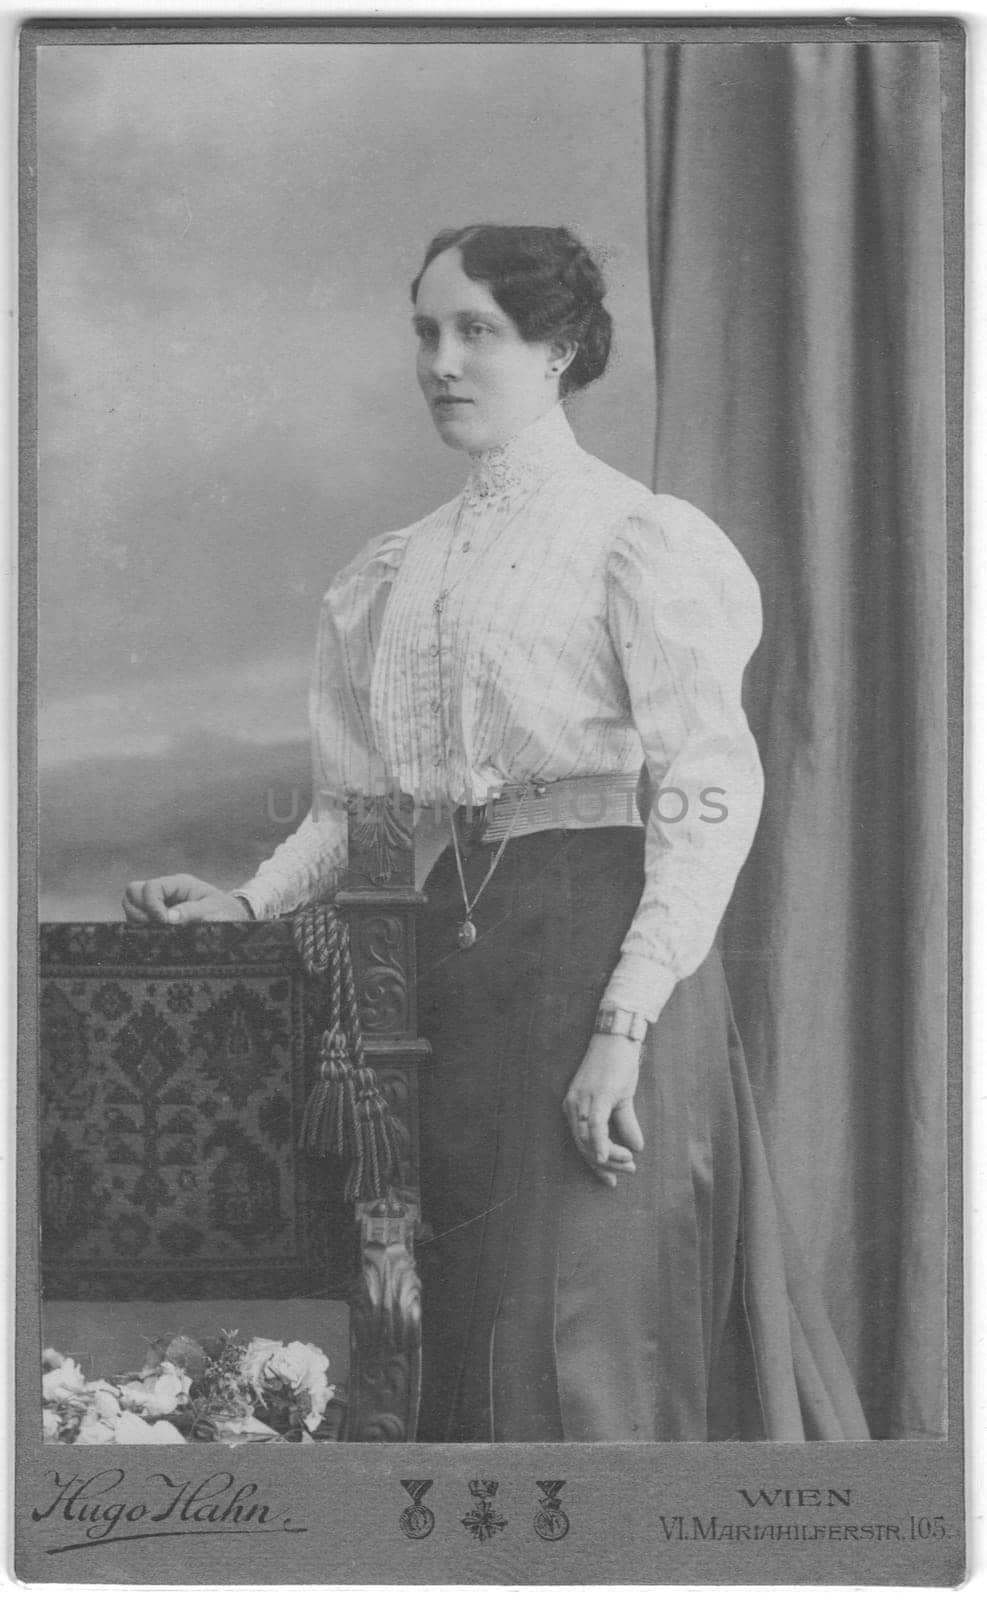 WIEN, AUSTRIA - HUNGARY - CIRCA 1910: Vintage cabinet card shows portrait of the middle-aged woman. Photo was taken in a photo studio. Edwardian hairstyle. Photo was taken in Austro-Hungarian Empire or also Austro-Hungarian Monarchy.